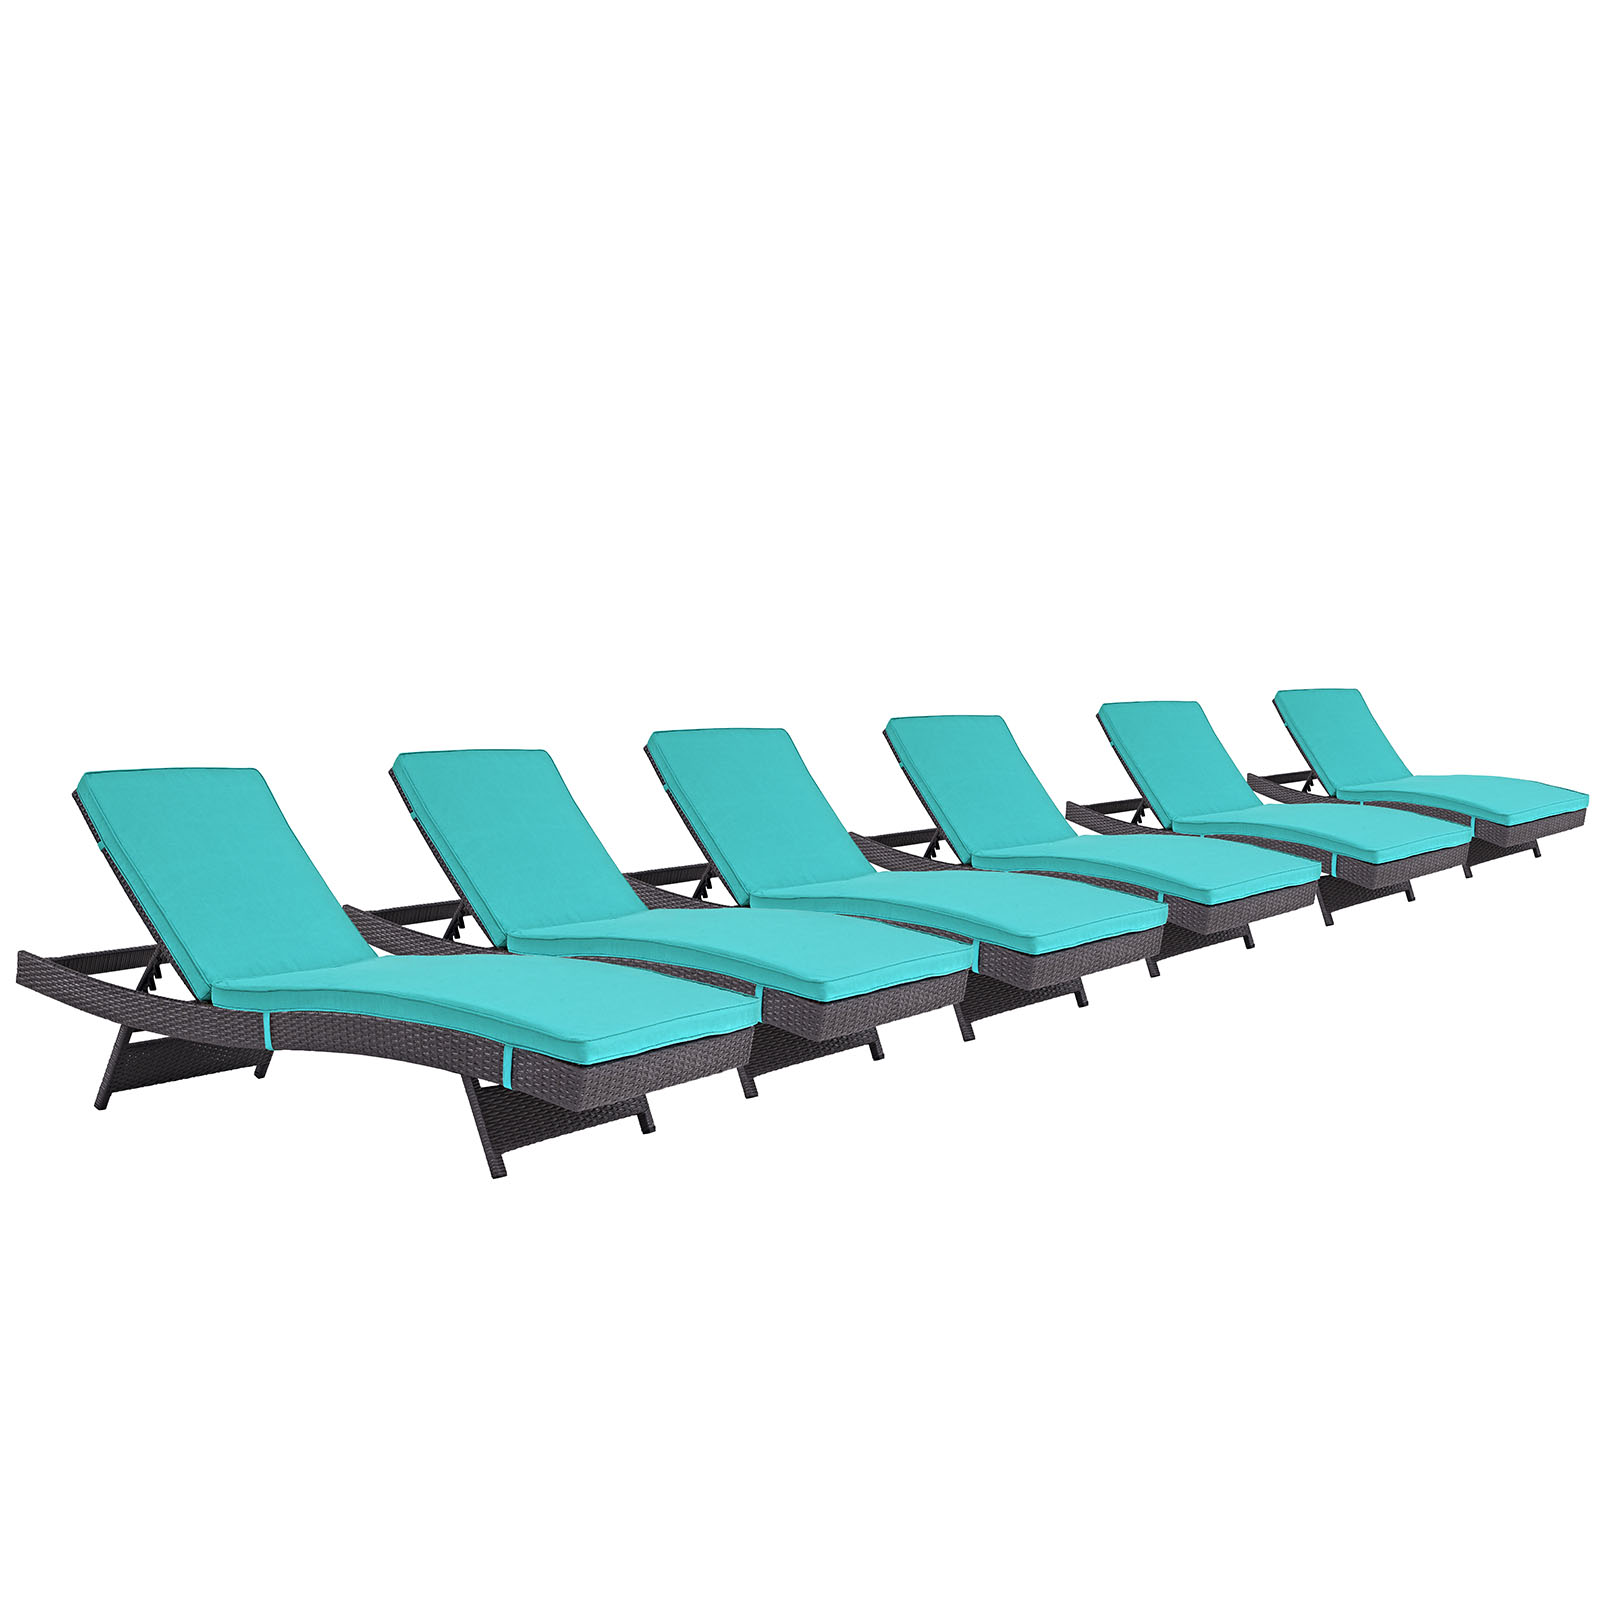 Modway Convene Chaise Outdoor Patio Set of 6 in Espresso Turquoise - image 2 of 5